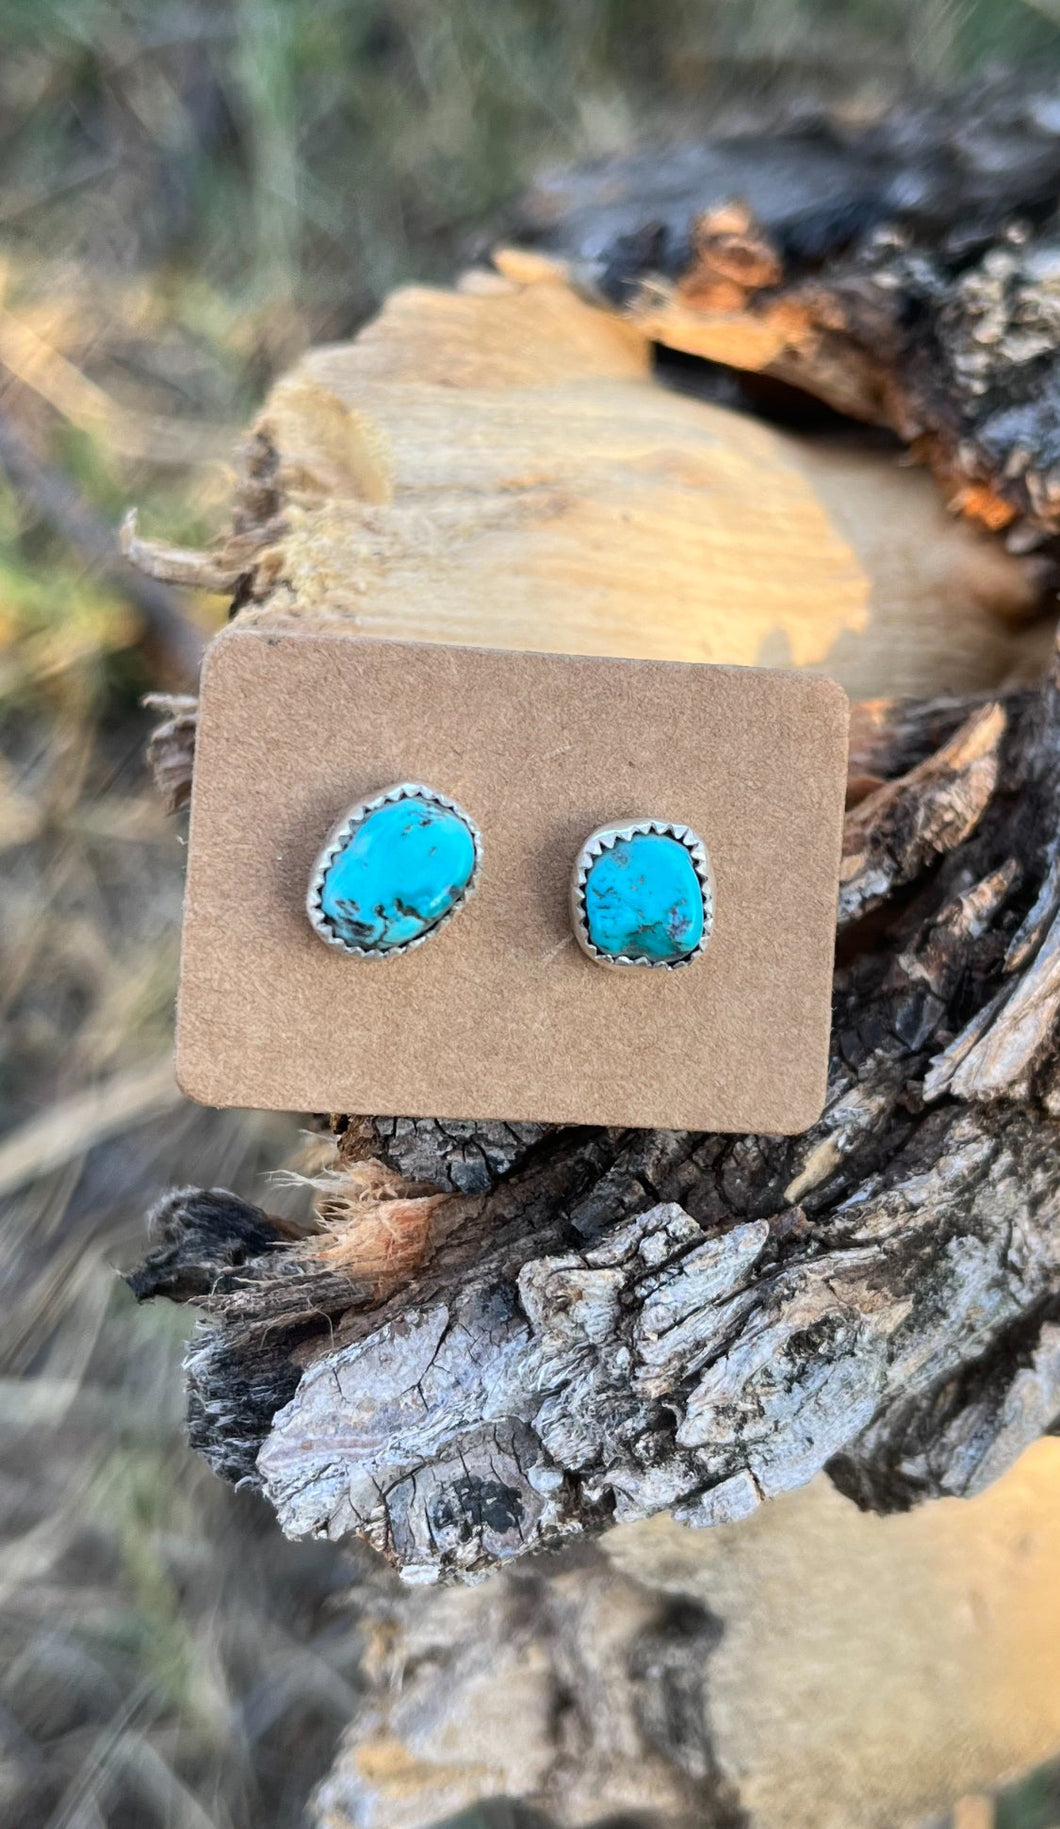 Kingman Turquoise asymmetrical stones set in sterling silver with silver posts and ear nuts, handmade by Taylor Made Silver.